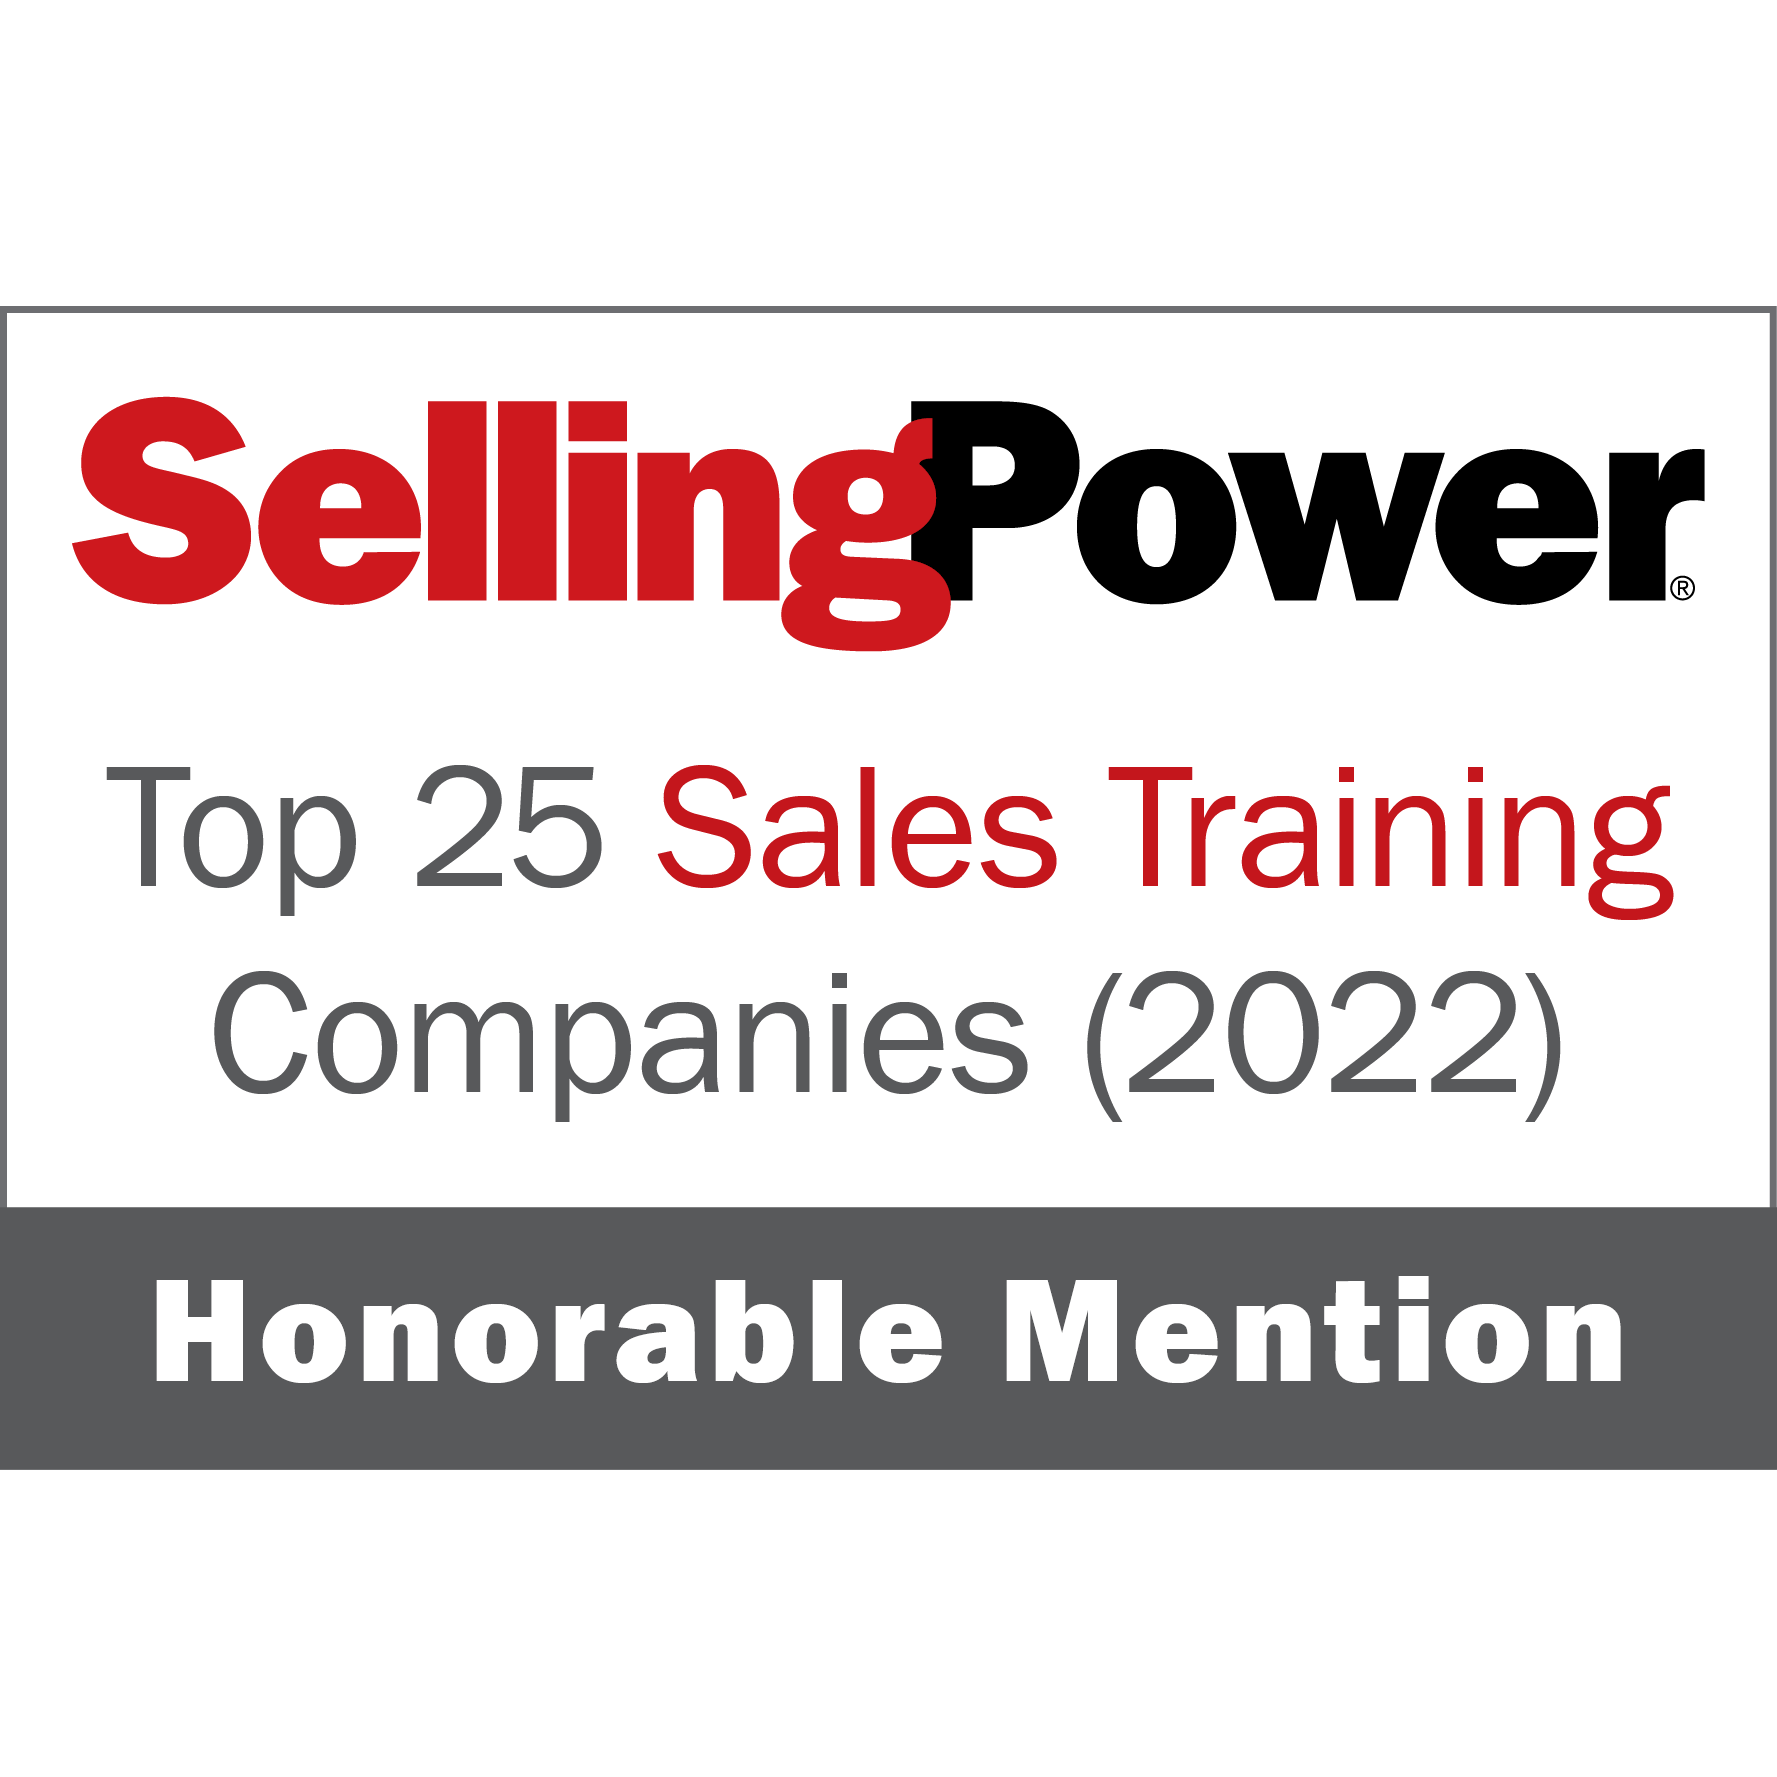 Sales Xceleration® Receives Honorable Mention on Selling Power’s Top Sales Training Companies List for CSL Training